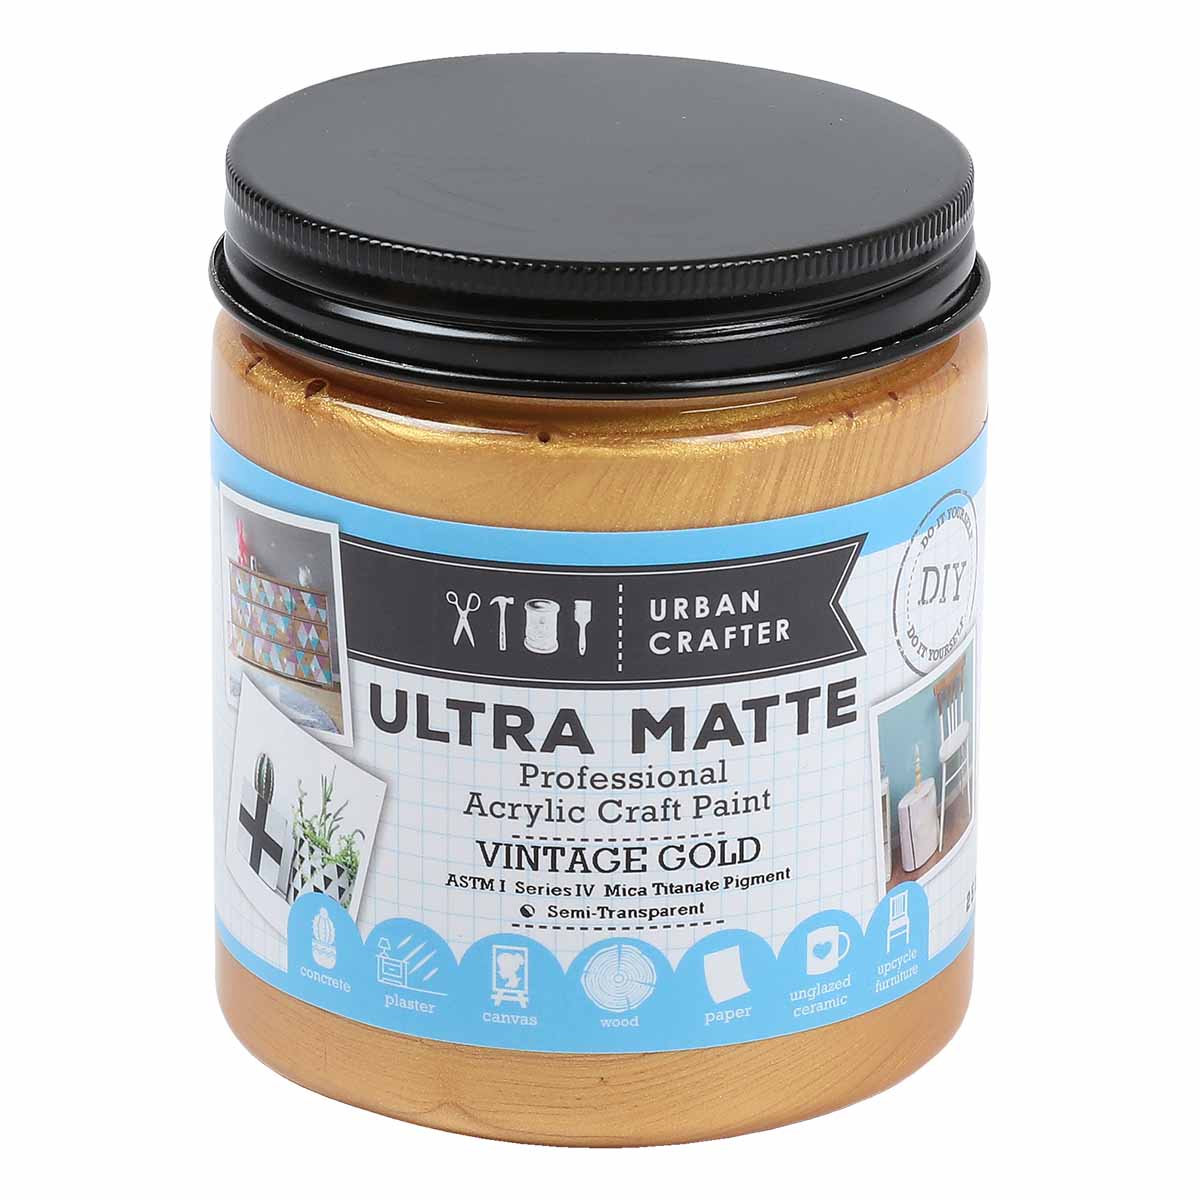 Image of Urban Crafter Ultra Matte Acrylic Paint 250ml Vintage Gold S4 ASTM1 Semi-Transparent